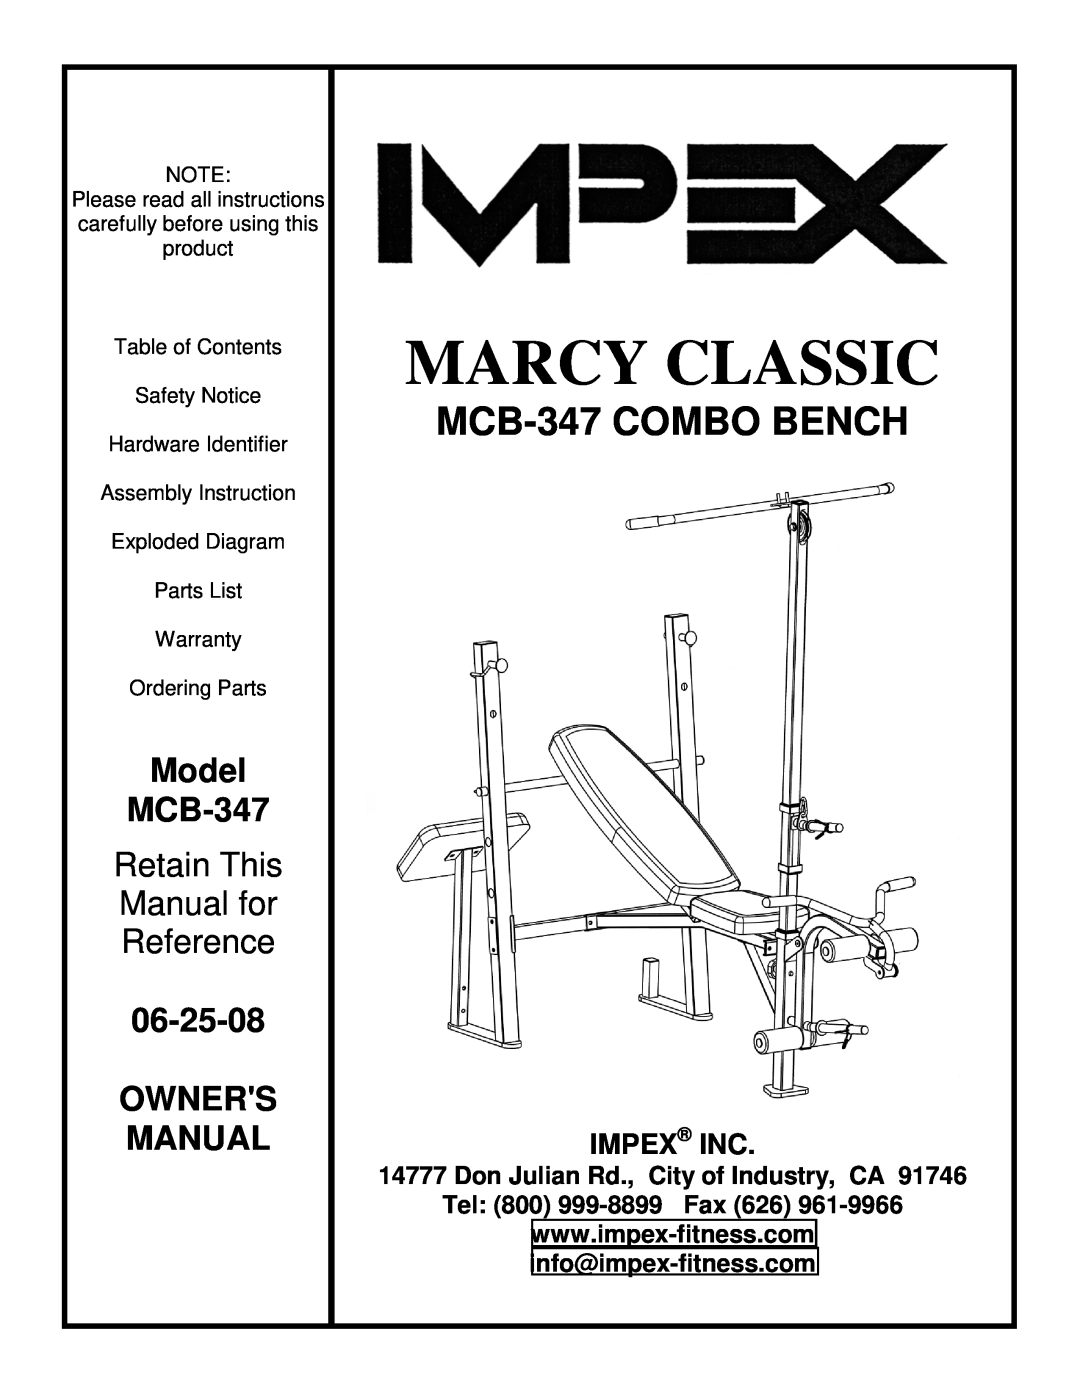 Impex manual Impex Inc, Marcy Classic, MCB-347 COMBO BENCH, Model, Retain This, Manual for, Reference, 06-25-08, Owners 